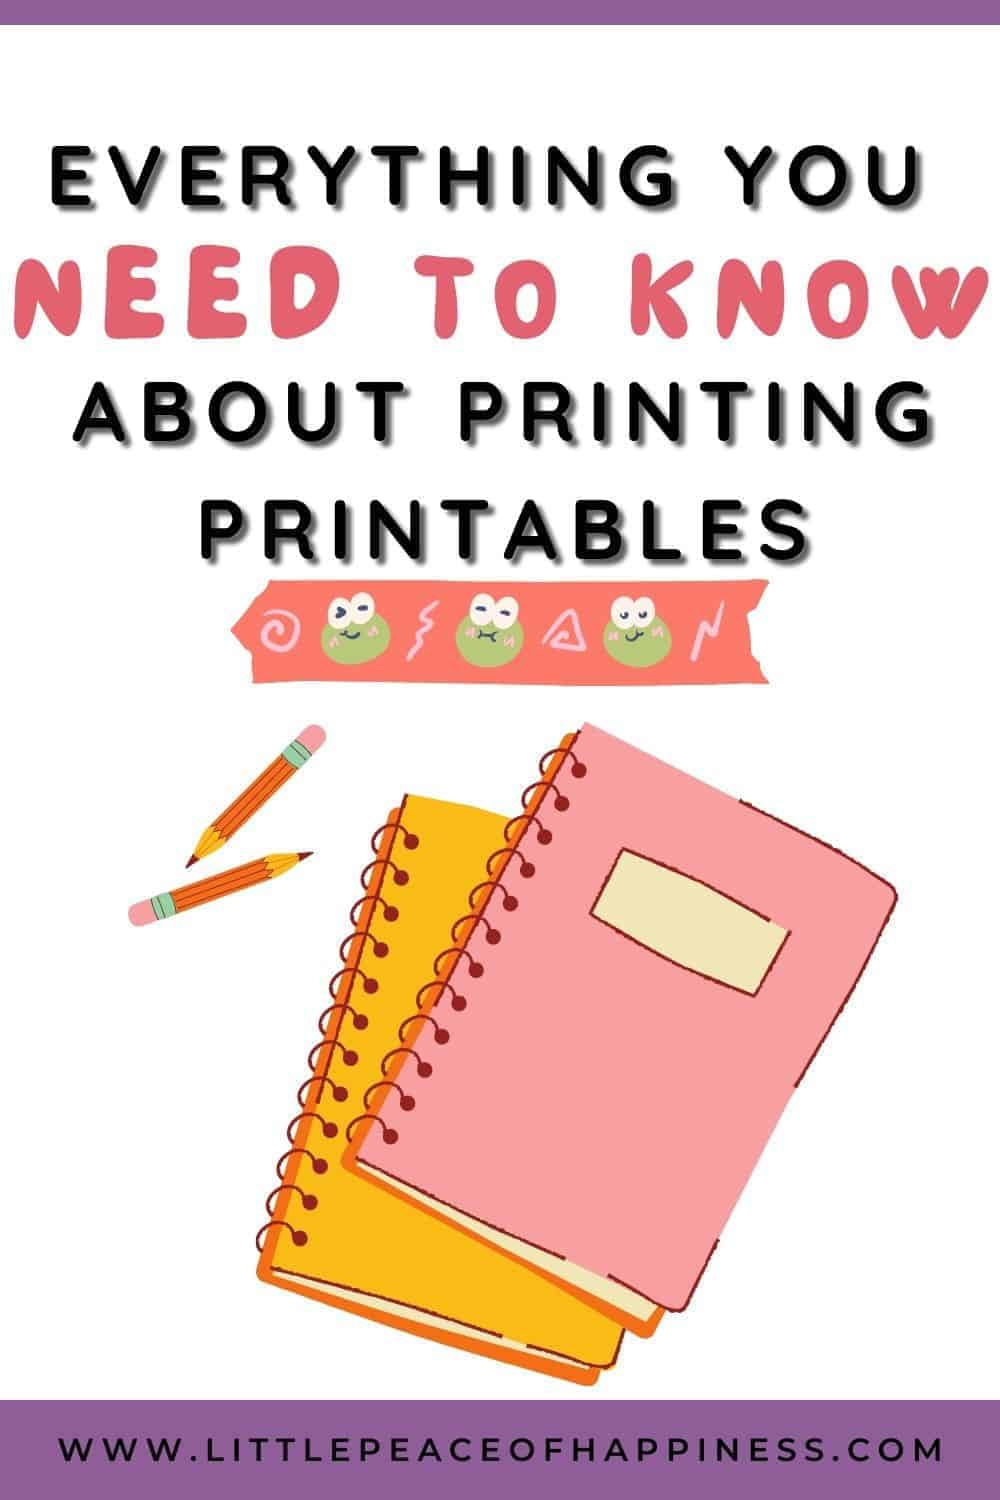 Everything you need to know about printing printables